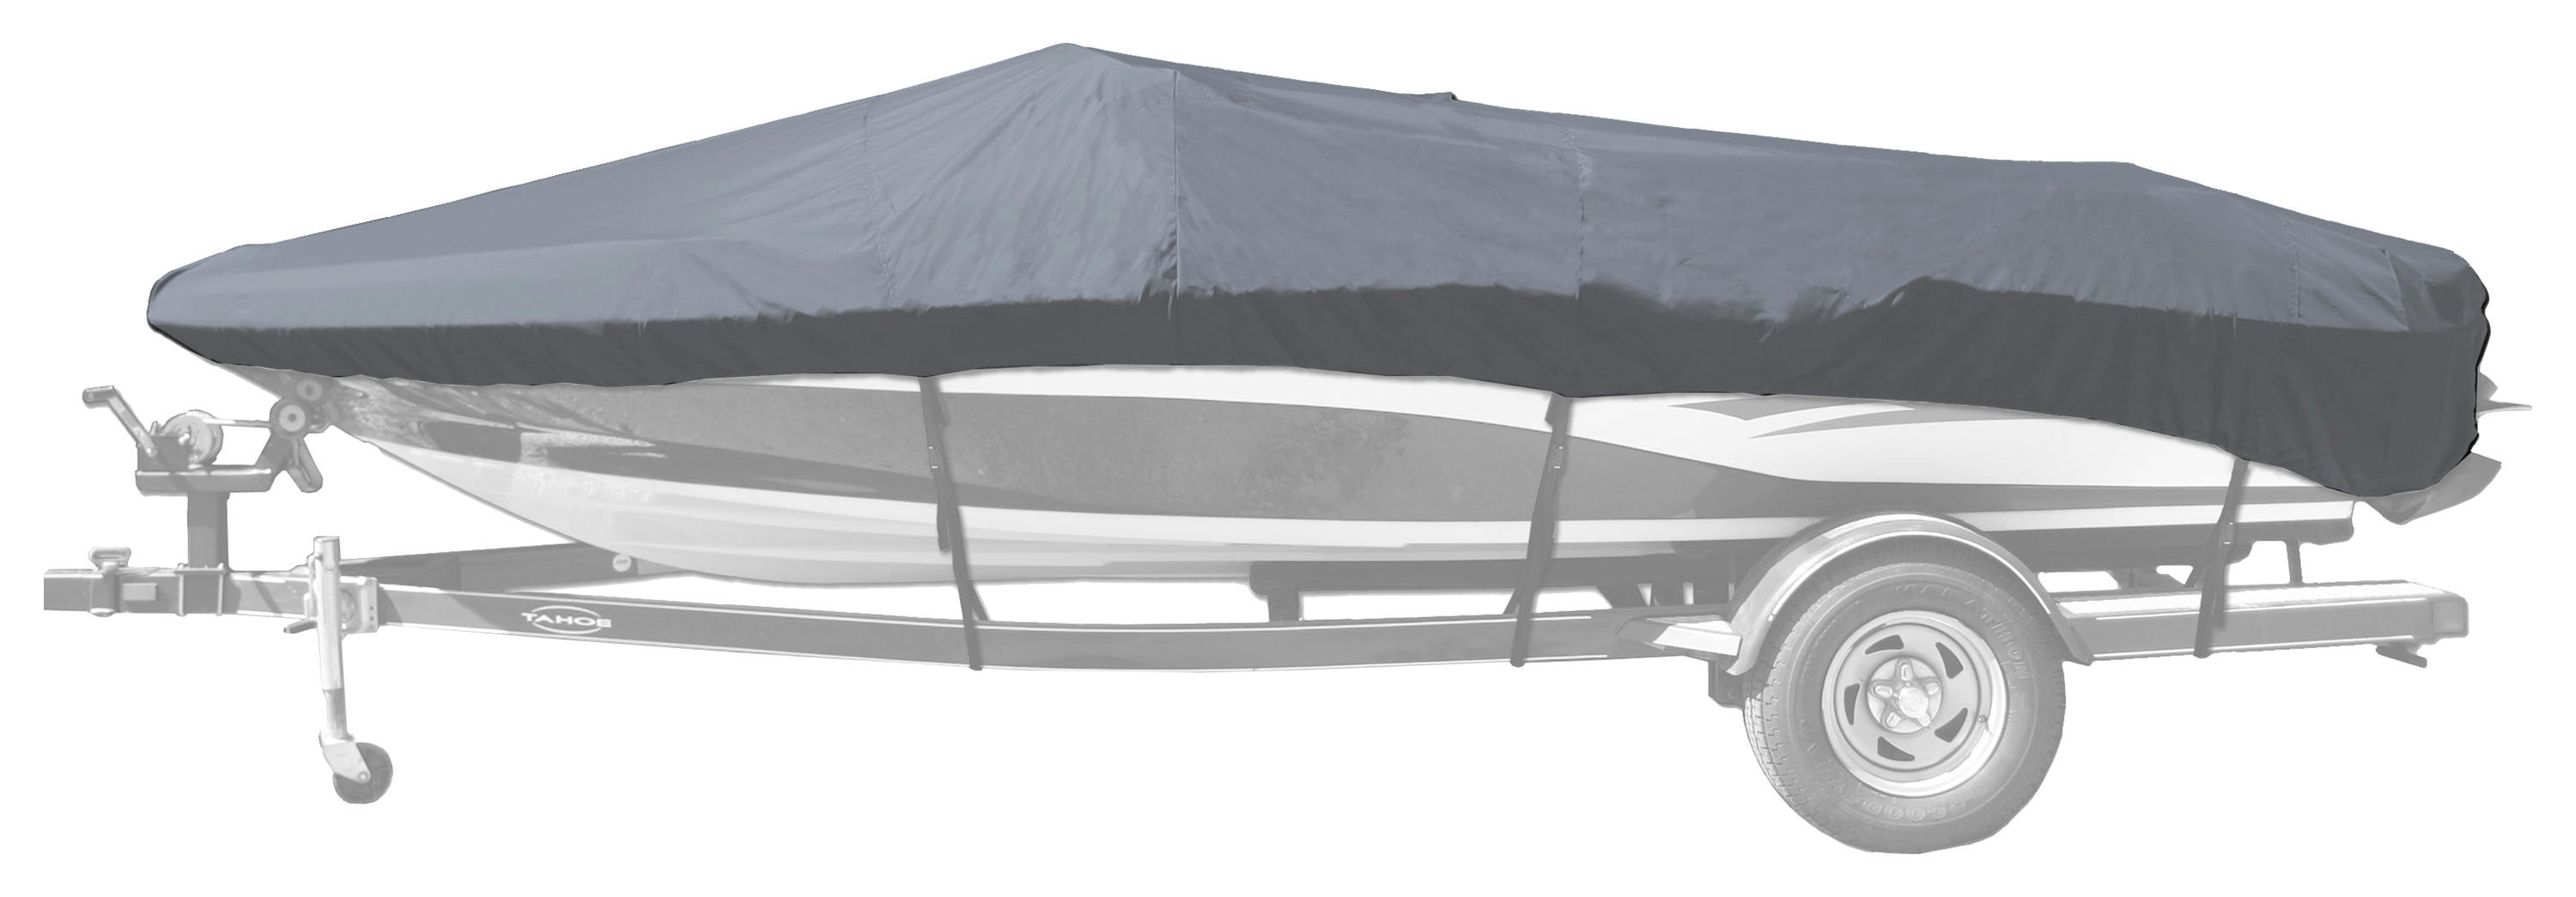 Bass Pro Shops Select Fit Hurricane Boat Cover by Westland for Euro V-Hull Runabout I/O Model - Gray - 18'6'' to 19'5